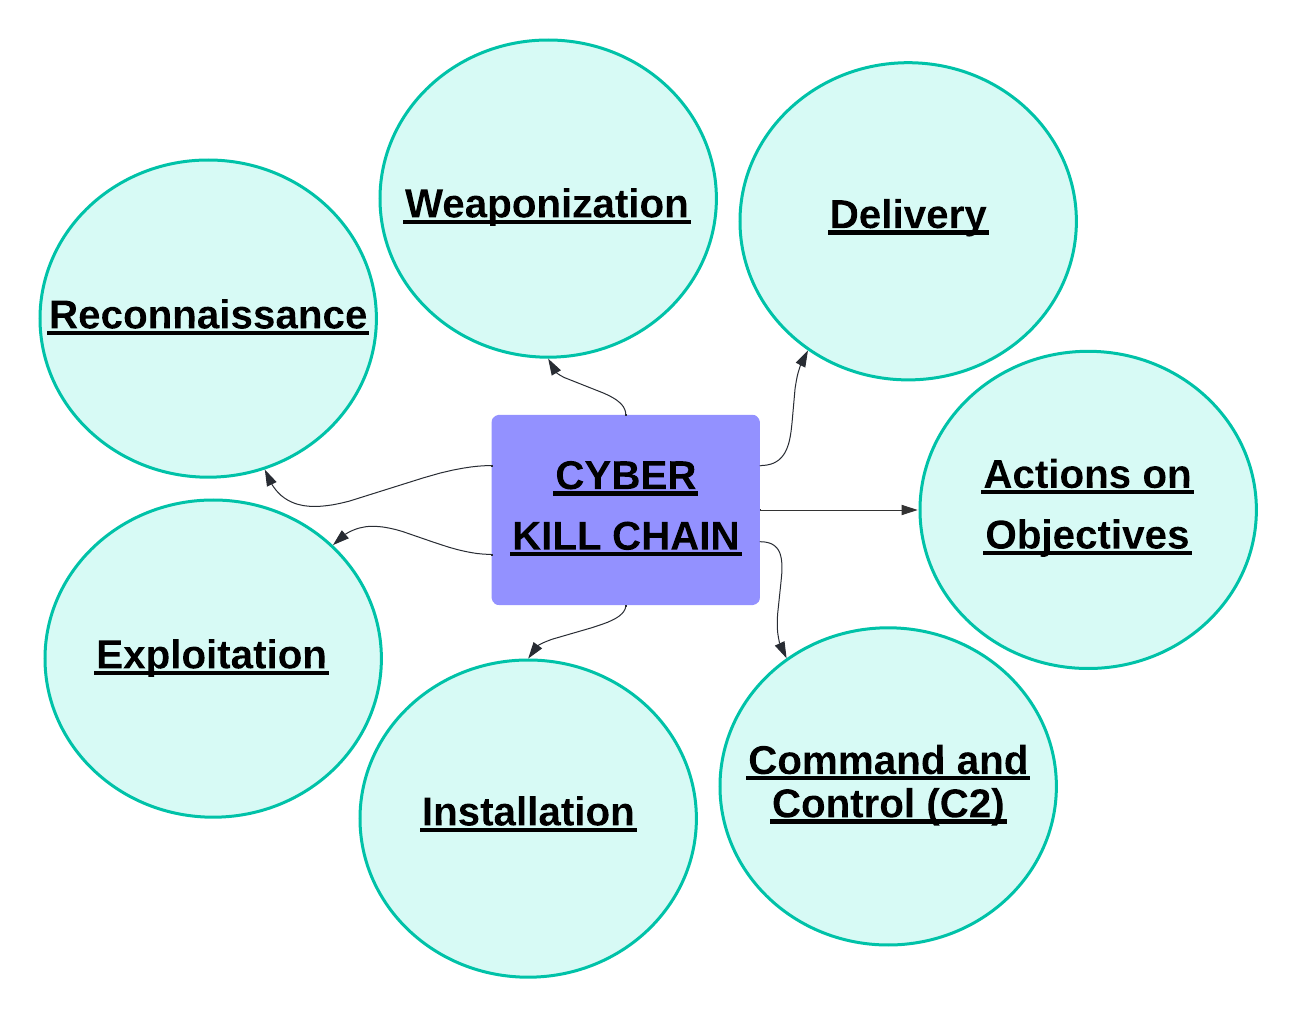 C:\Users\Dell\Desktop\Shapes\Cyber kill chain steps.png